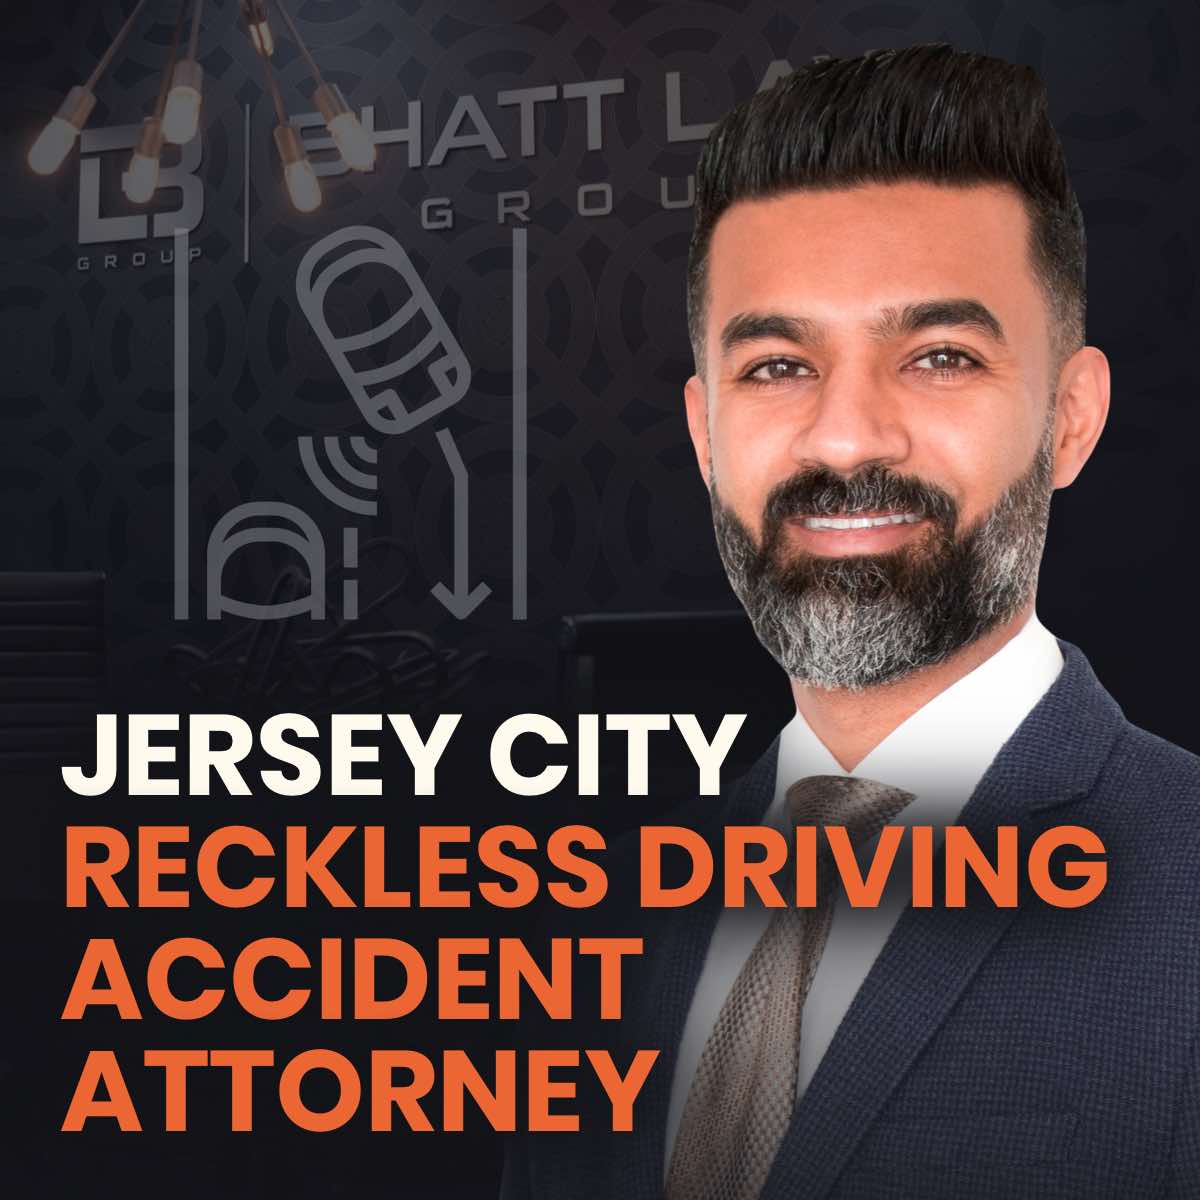 Jersey City Reckless Driving Accident Attorney